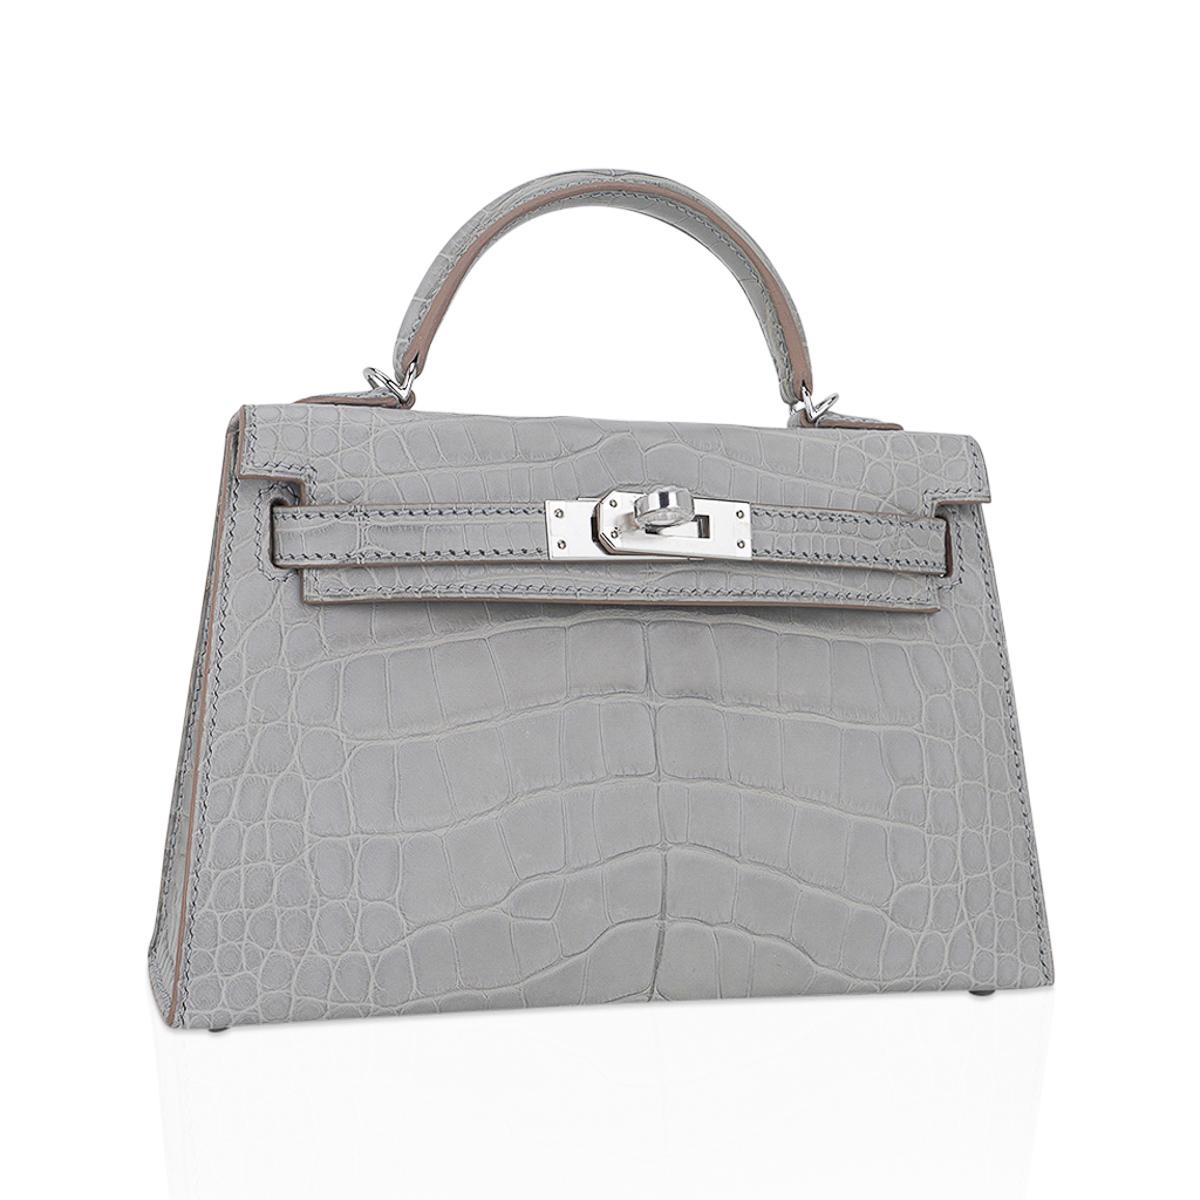 Mightychic offers a Limited Edition Hermes Kelly 20 Sellier bag featured in Matte Gris Perle alligator.
Crisp with palladium hardware.
Timeless and highly coveted this exquisite pearl gray mini Hermes Kelly bag is a collectors treasure.
The Kelly 20